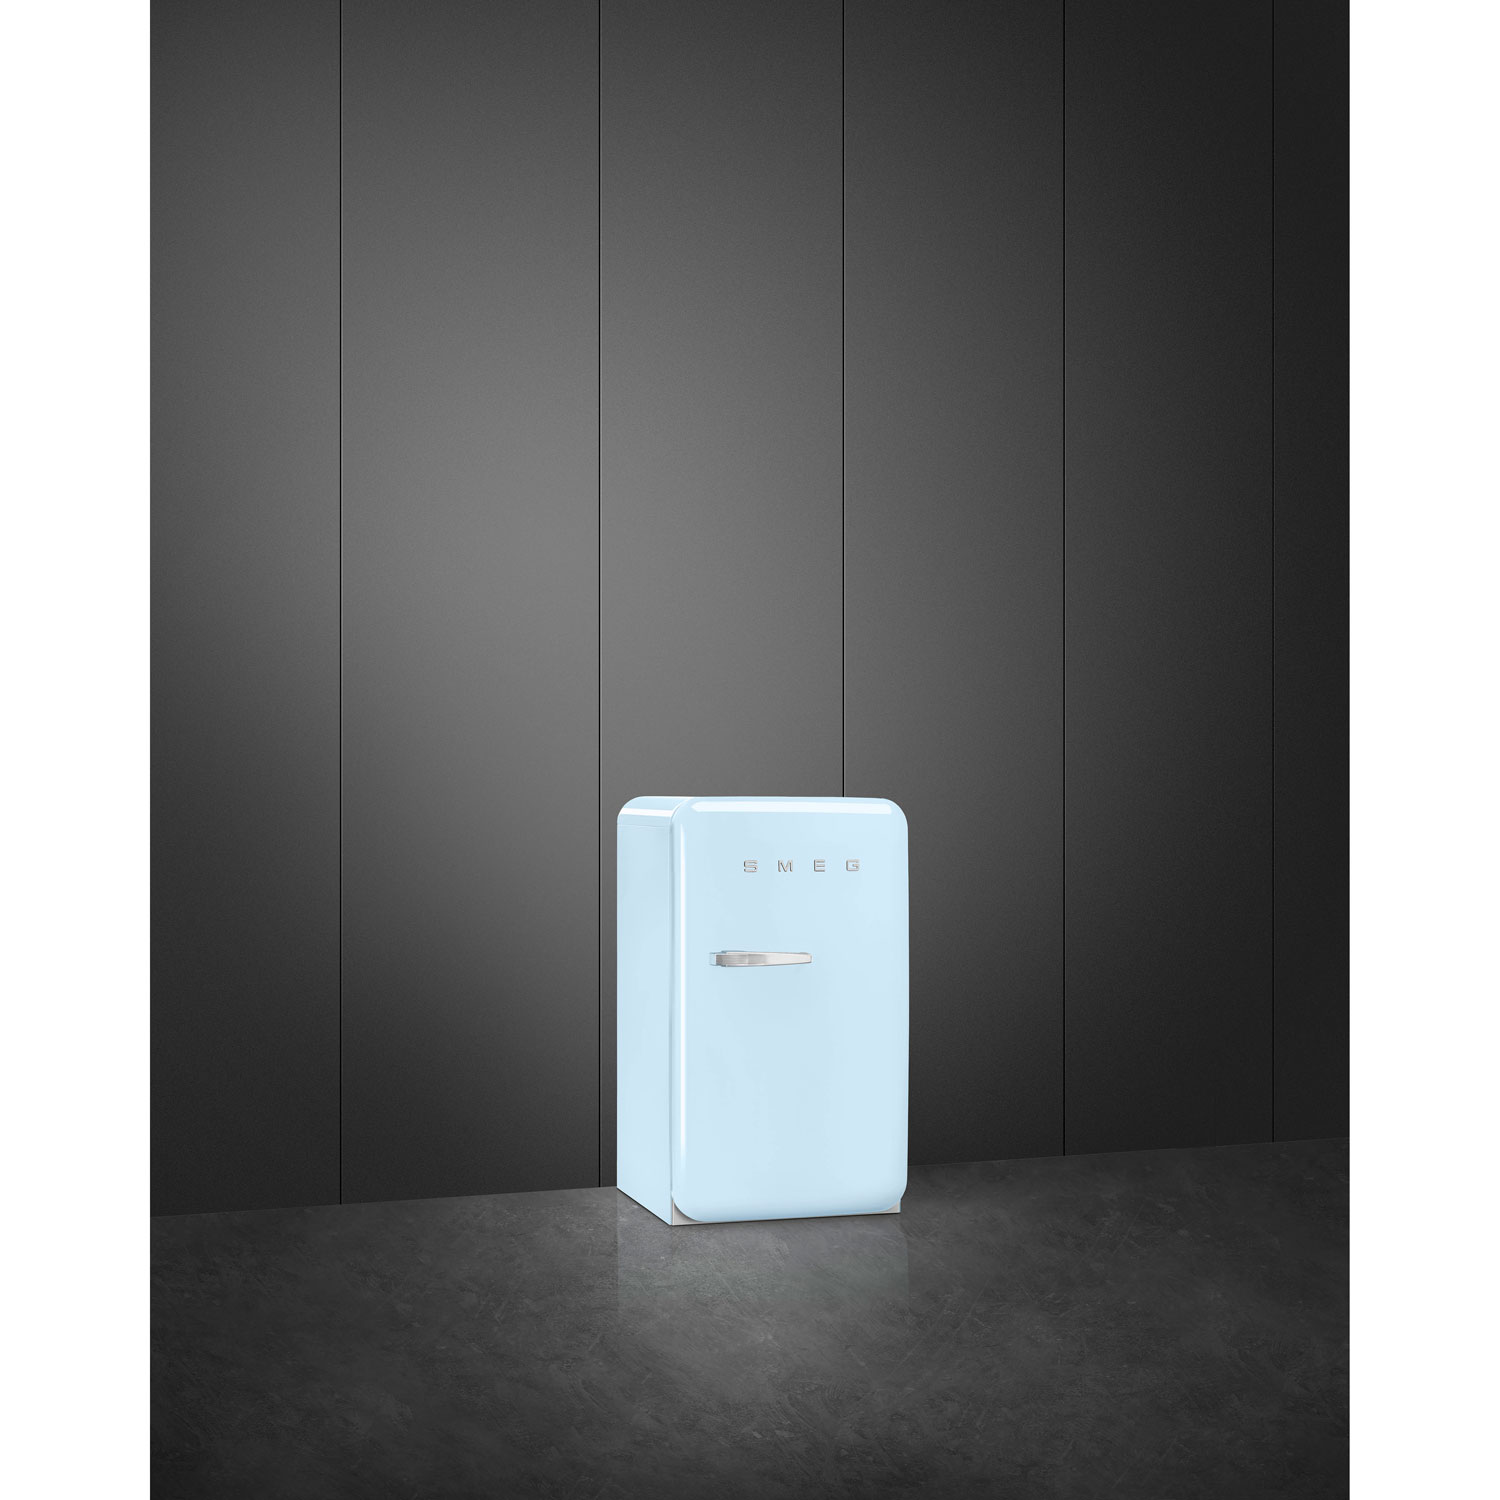 Smeg FAB10URPB3 22 Inch Freestanding Compact Refrigerator with 4.31 Cu. Ft.  Capacity, 2 Glass Shelves, 1 Bottle Shelf, 37 dBA Noise Level, LED Internal  Light, Automatic Frost Free, and Energy Star Compliant: Pastel Blue, Right  Hinge